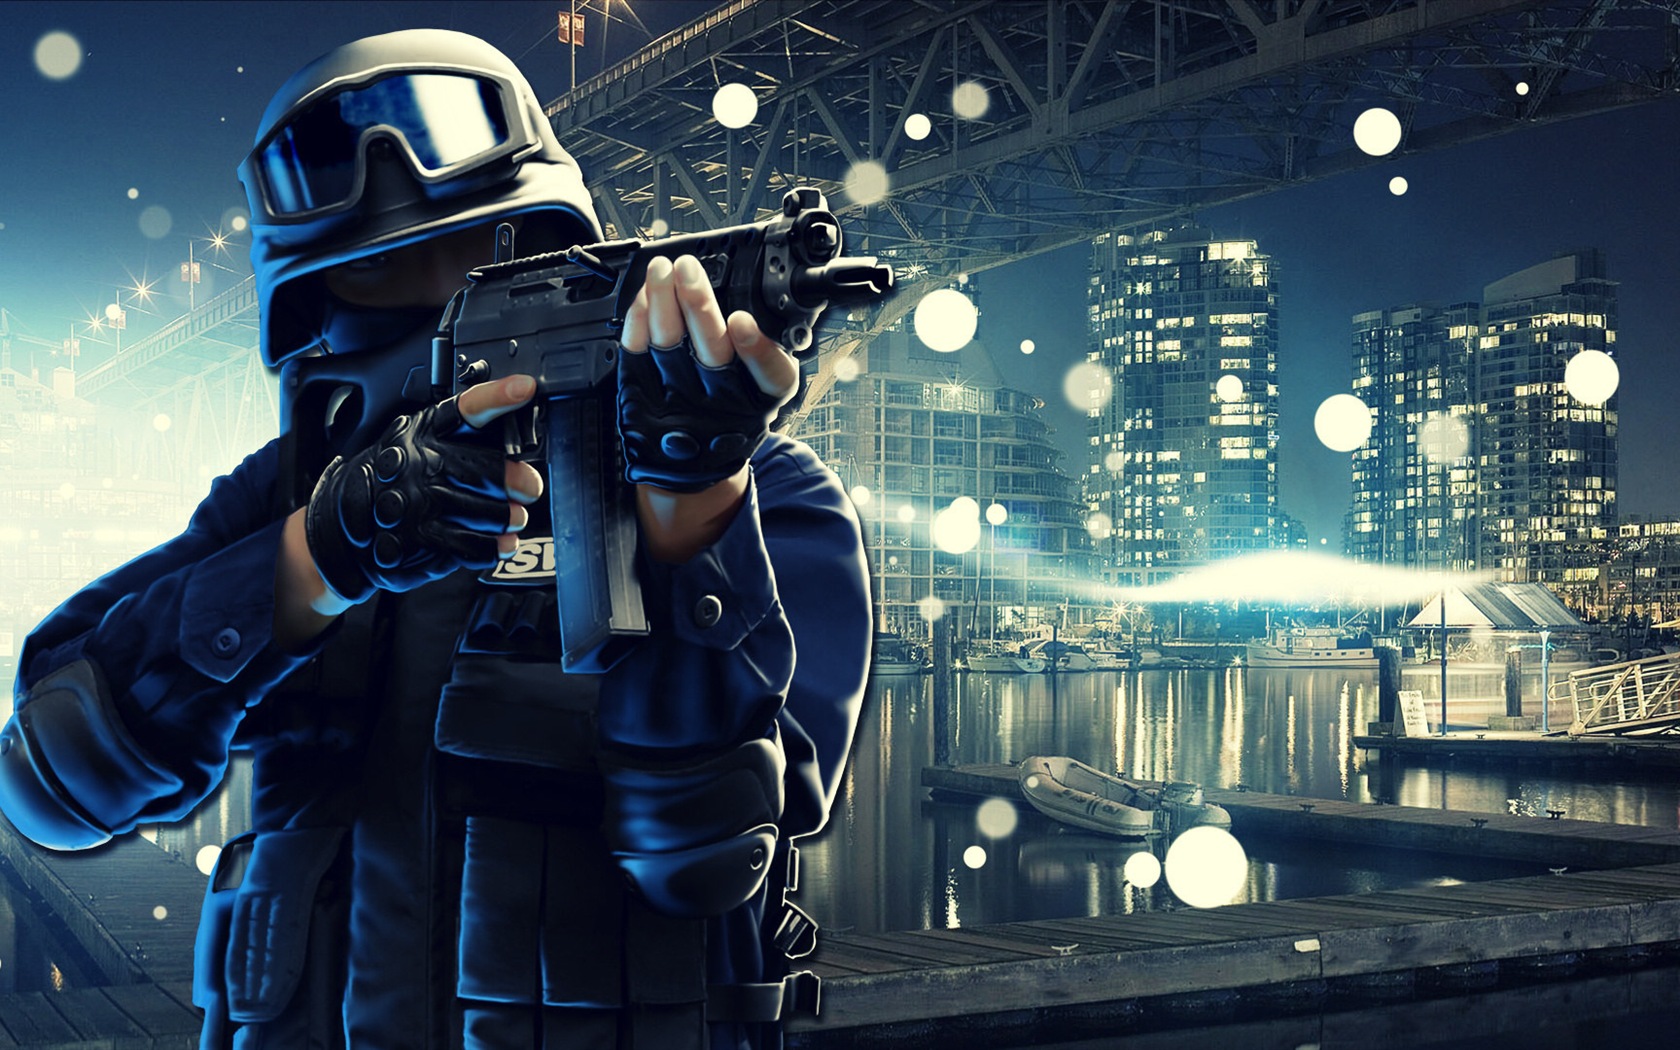 Point Blank HD game wallpapers #13 - 1680x1050